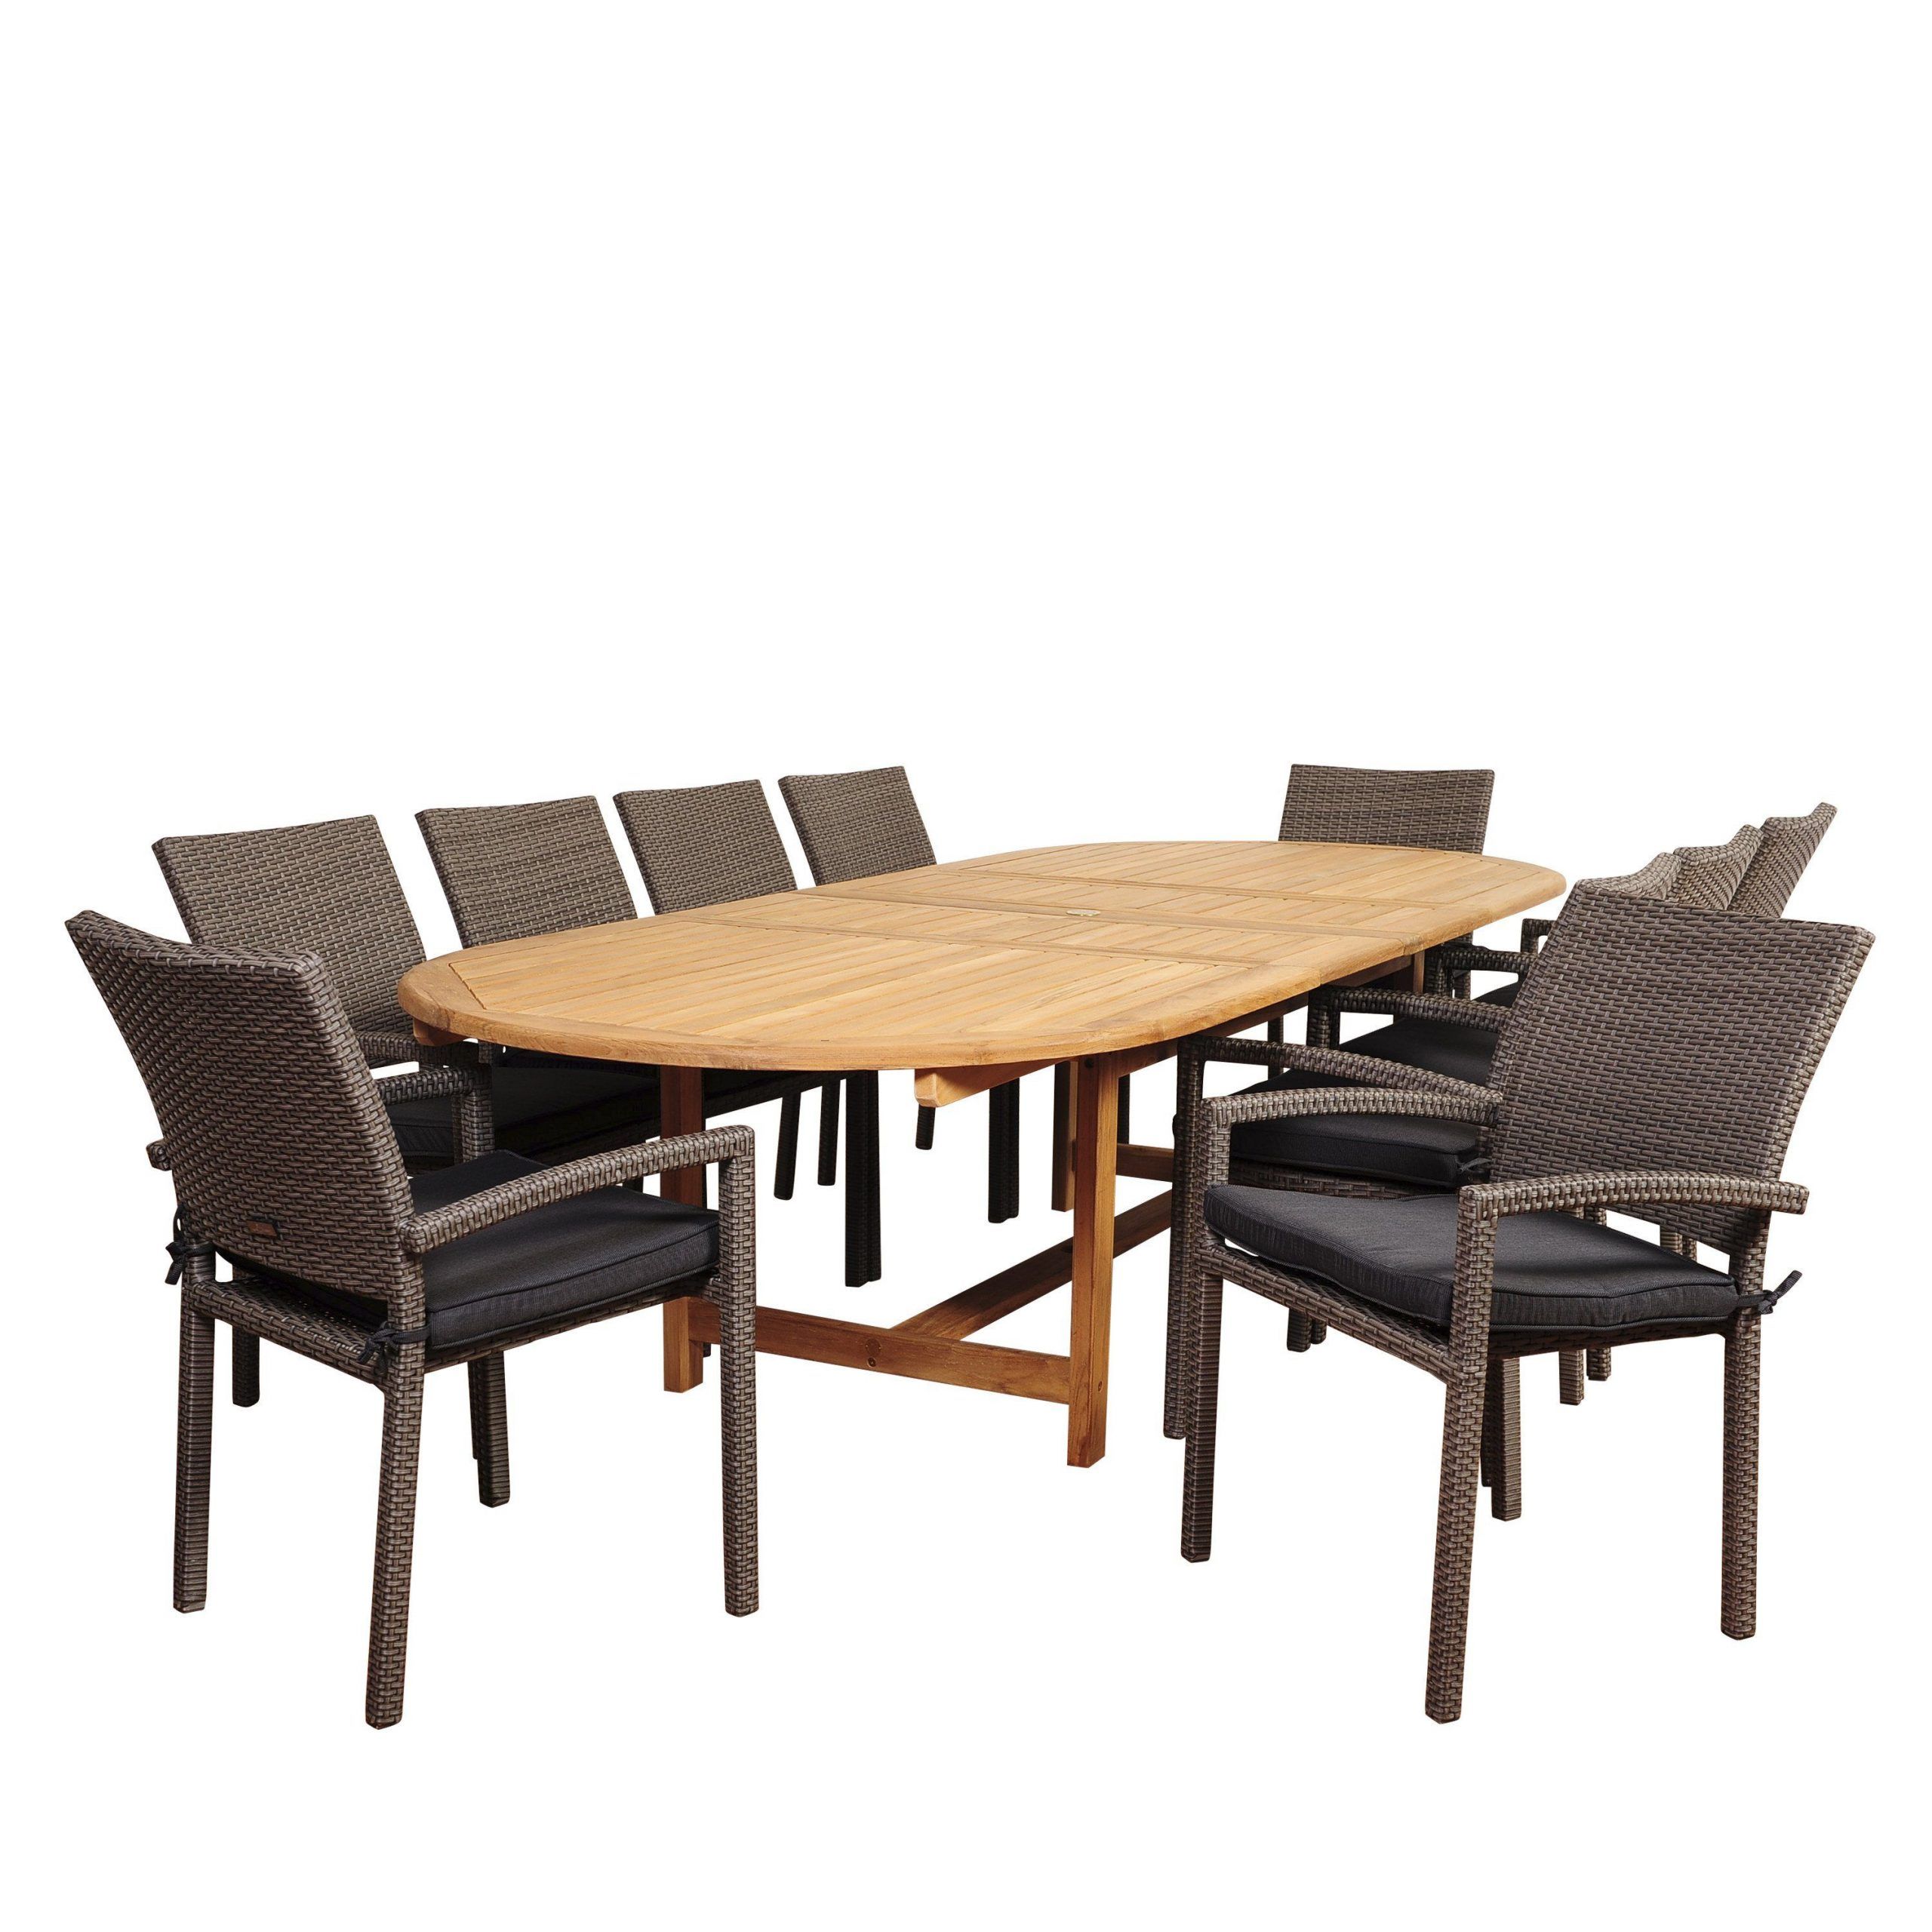 Amazonia City Villa 11 Piece Teak/Wicker Double Extendable Oval Dining Within Gray Extendable Patio Dining Sets (View 12 of 15)